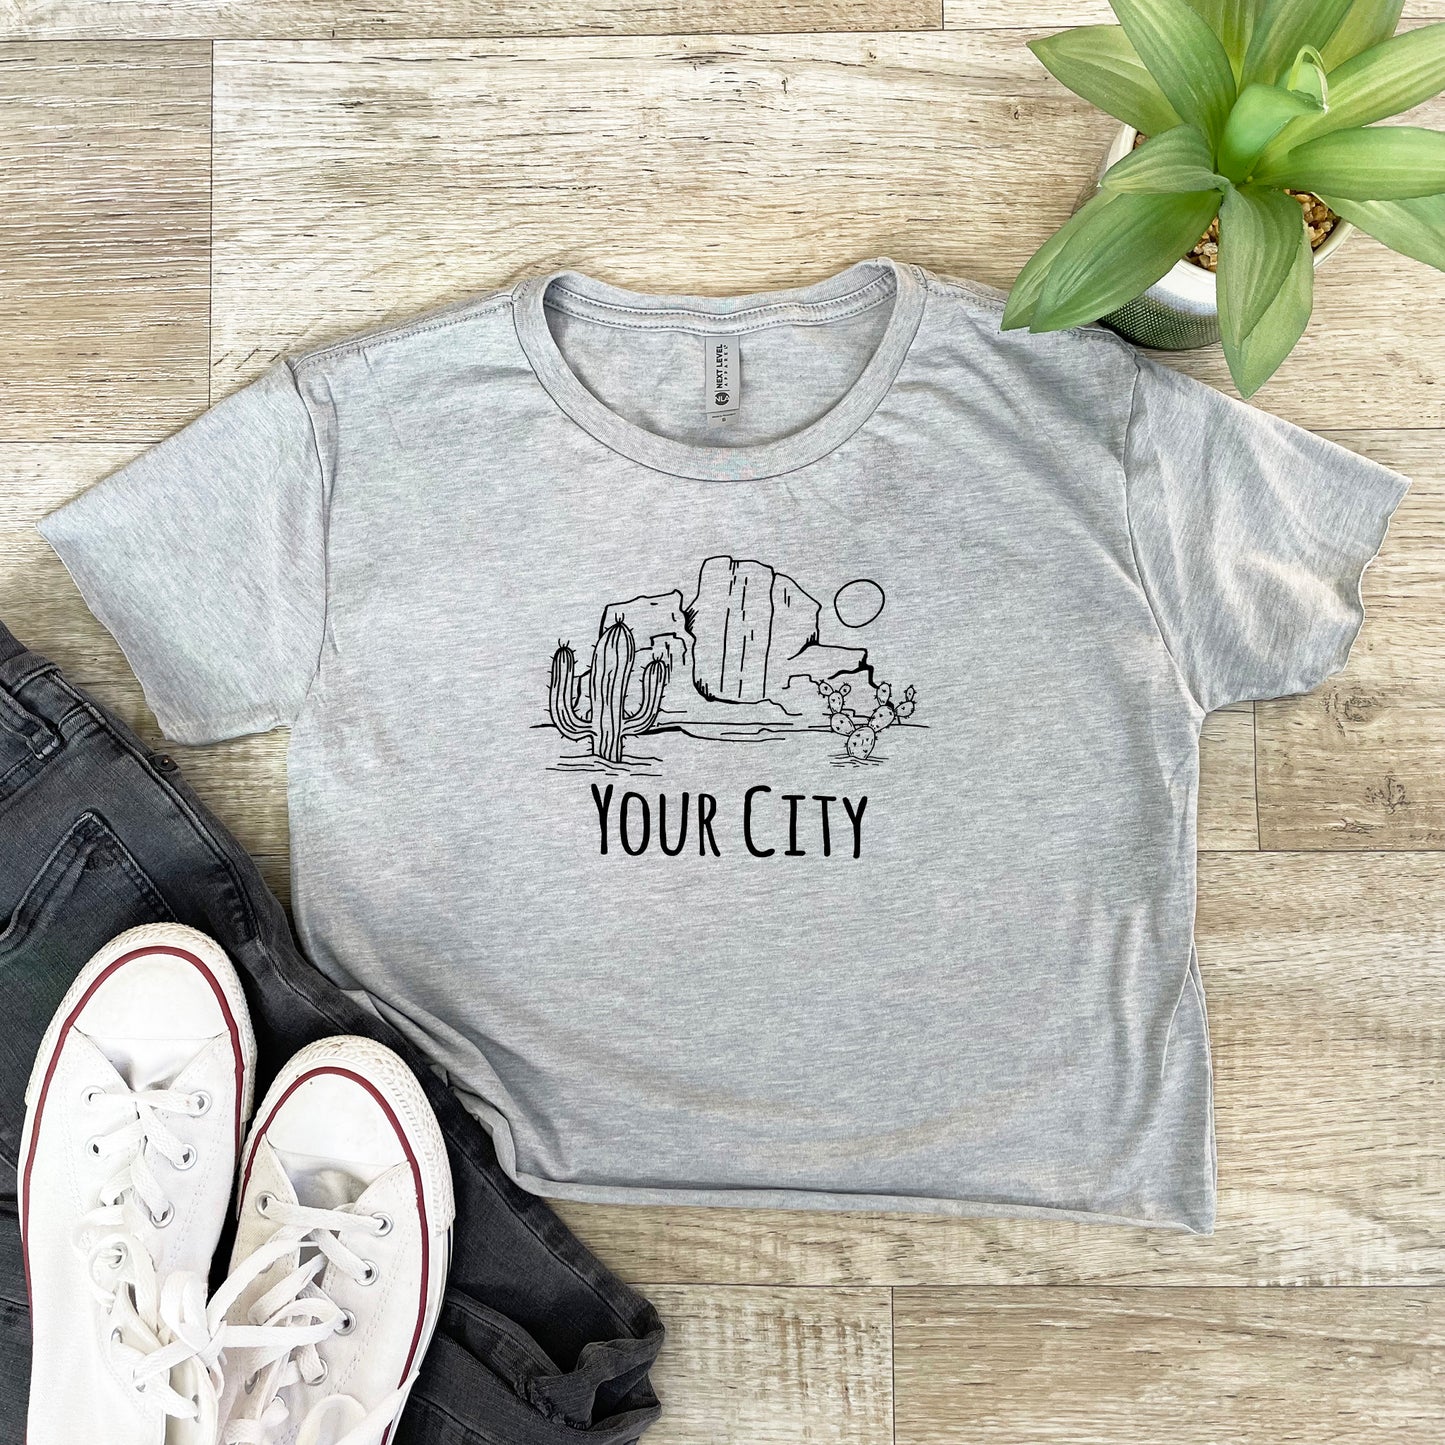 a t - shirt that says your city on it next to a pair of sneakers